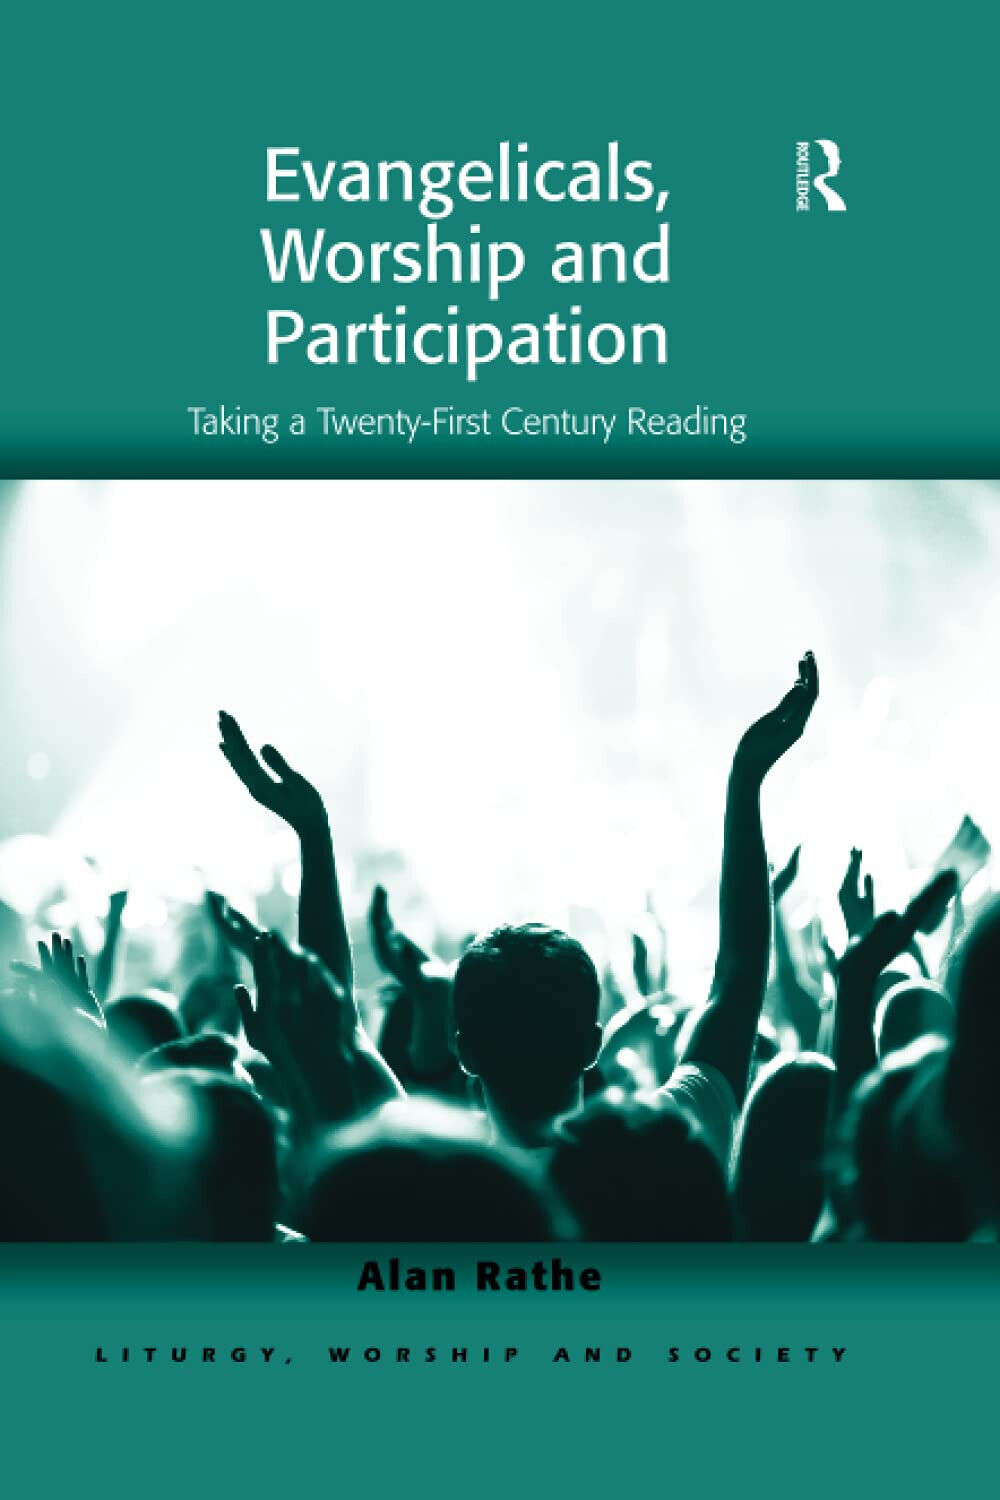 Evangelicals, Worship And Participation - Alan Rathe - Taylor & Francis, 2021